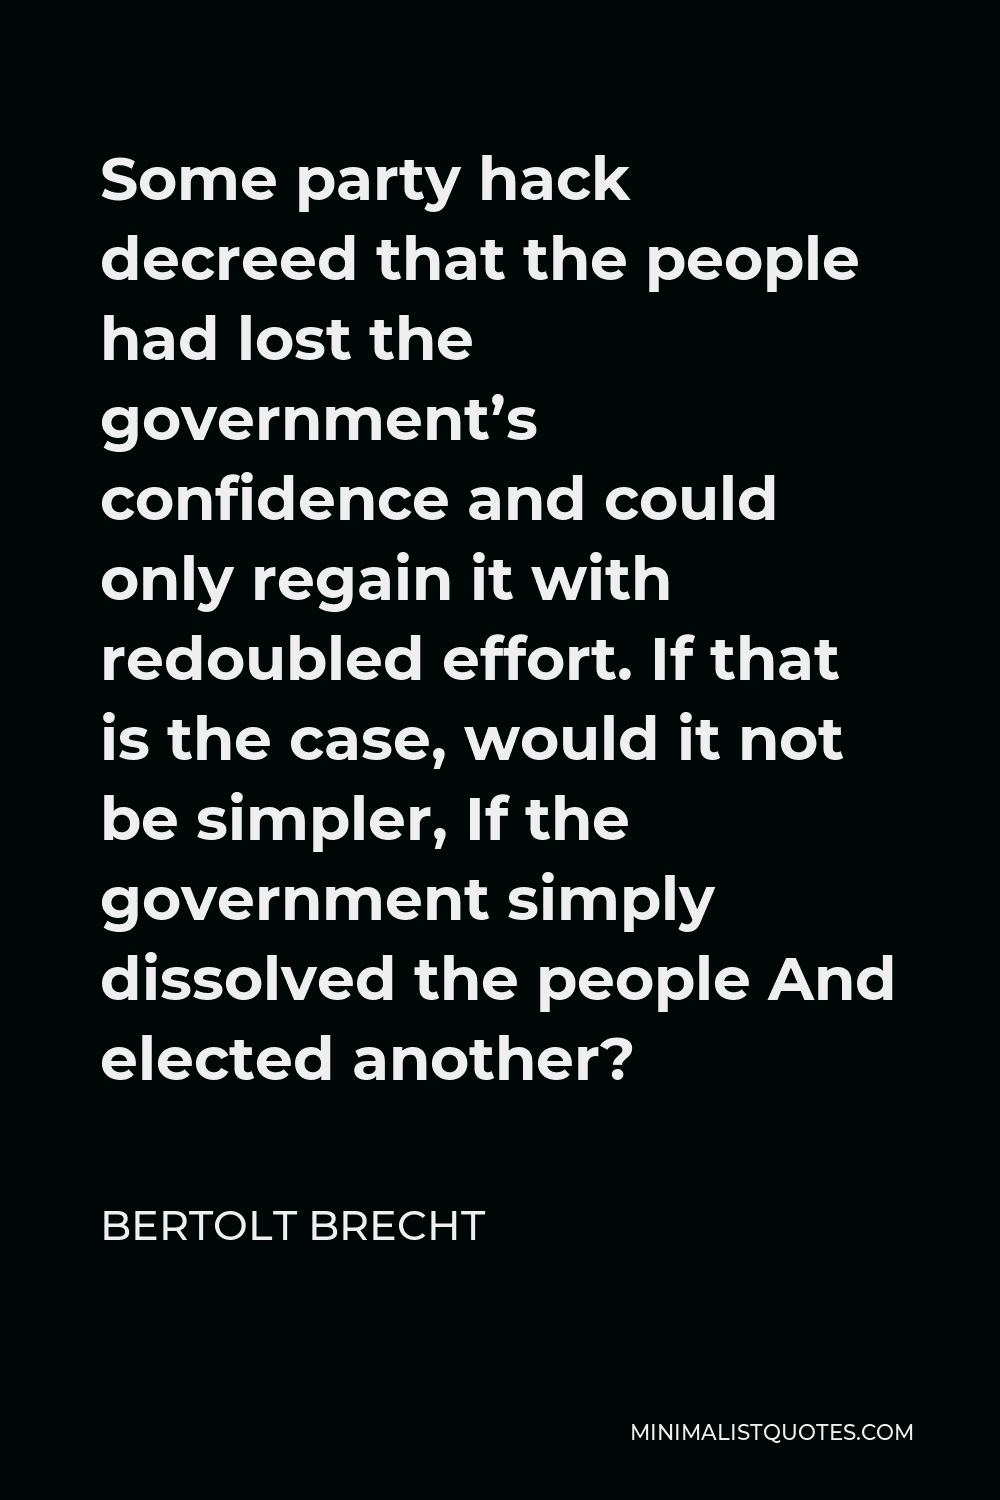 Bertolt Brecht Quote - Some party hack decreed that the people had lost the government’s confidence and could only regain it with redoubled effort. If that is the case, would it not be simpler, If the government simply dissolved the people And elected another?